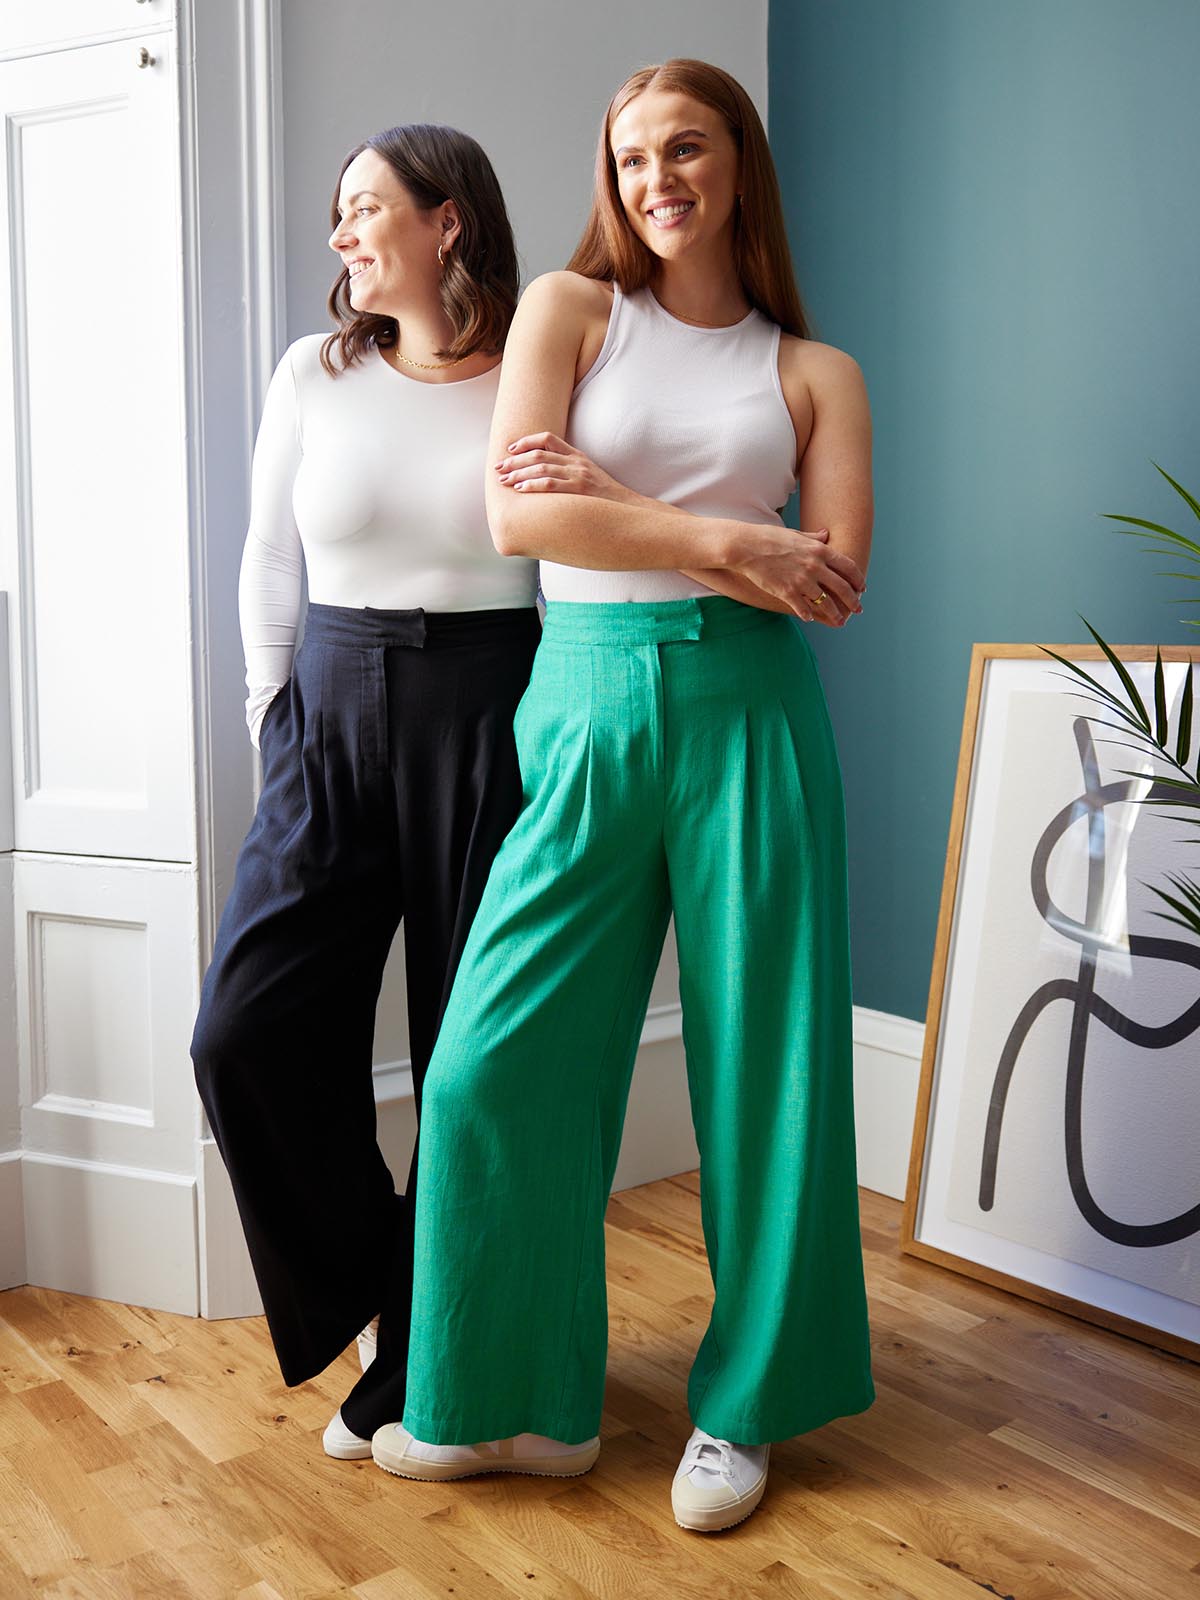 Two models, both wearing the Lana trousers - one in black and the other in green. Both models are smiling and looking in different directions. 